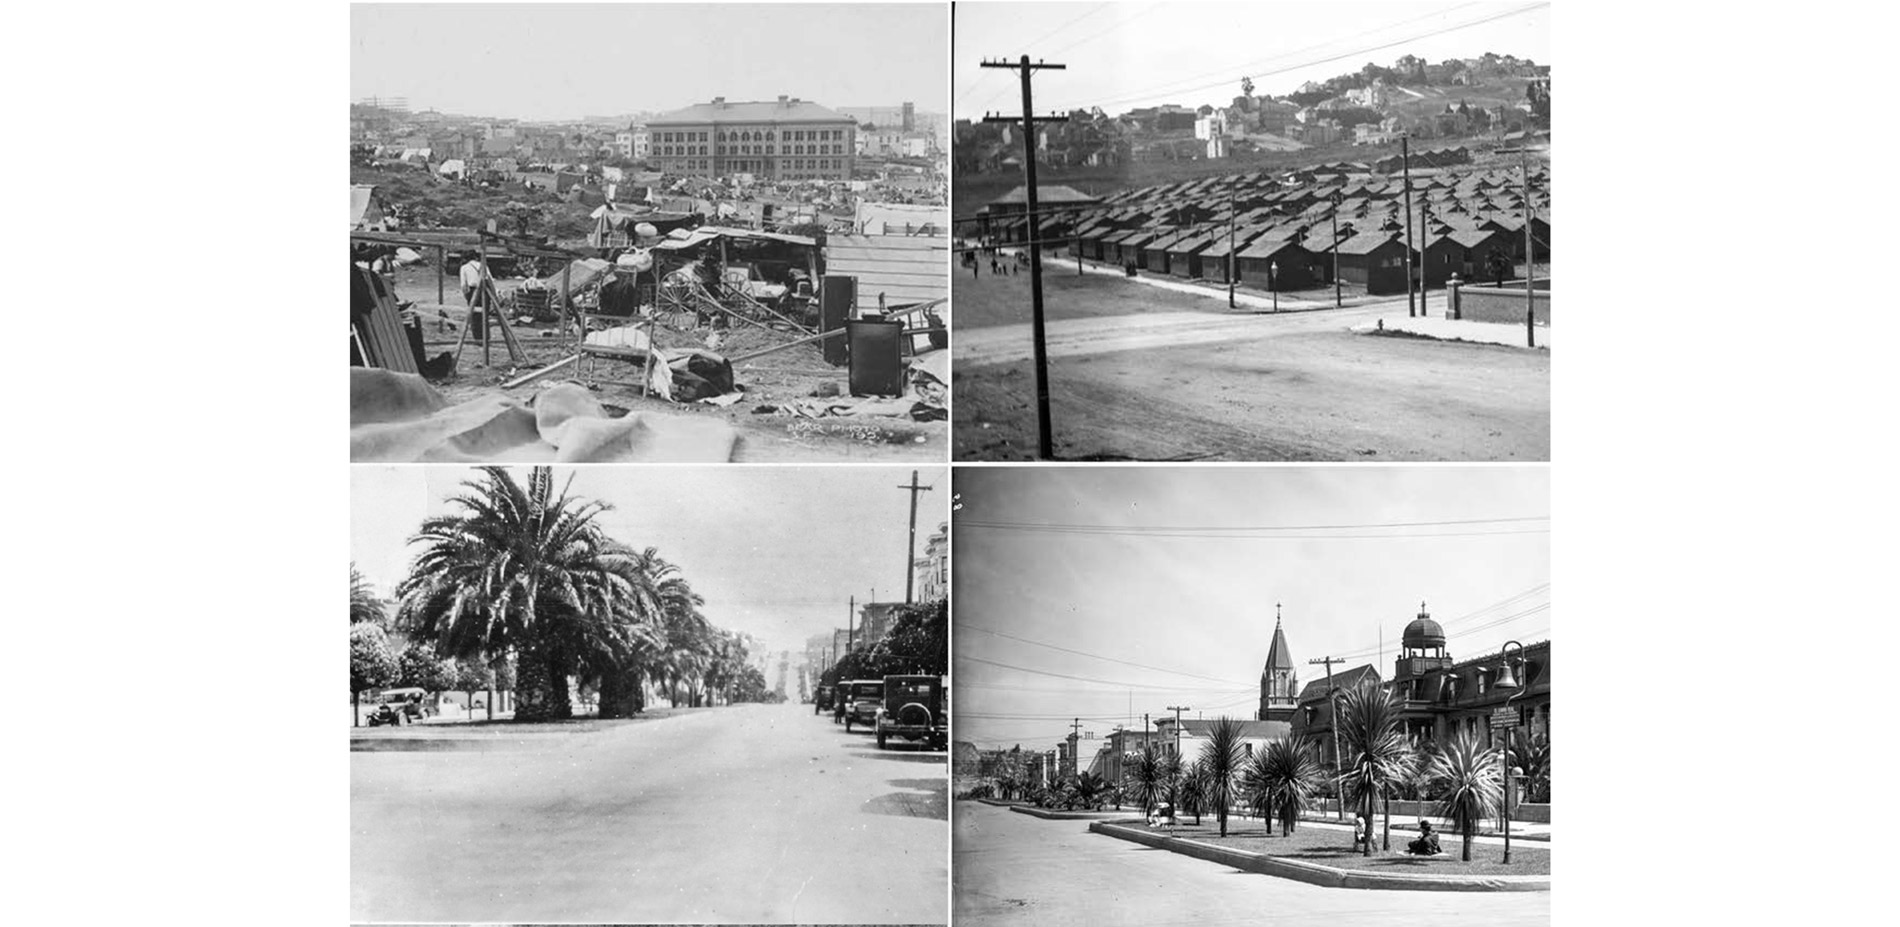 The 1906 earthquake displaced thousands of San Franciscans who then took refuge in city parks. Government built earthquake shacks filled Mission Dol